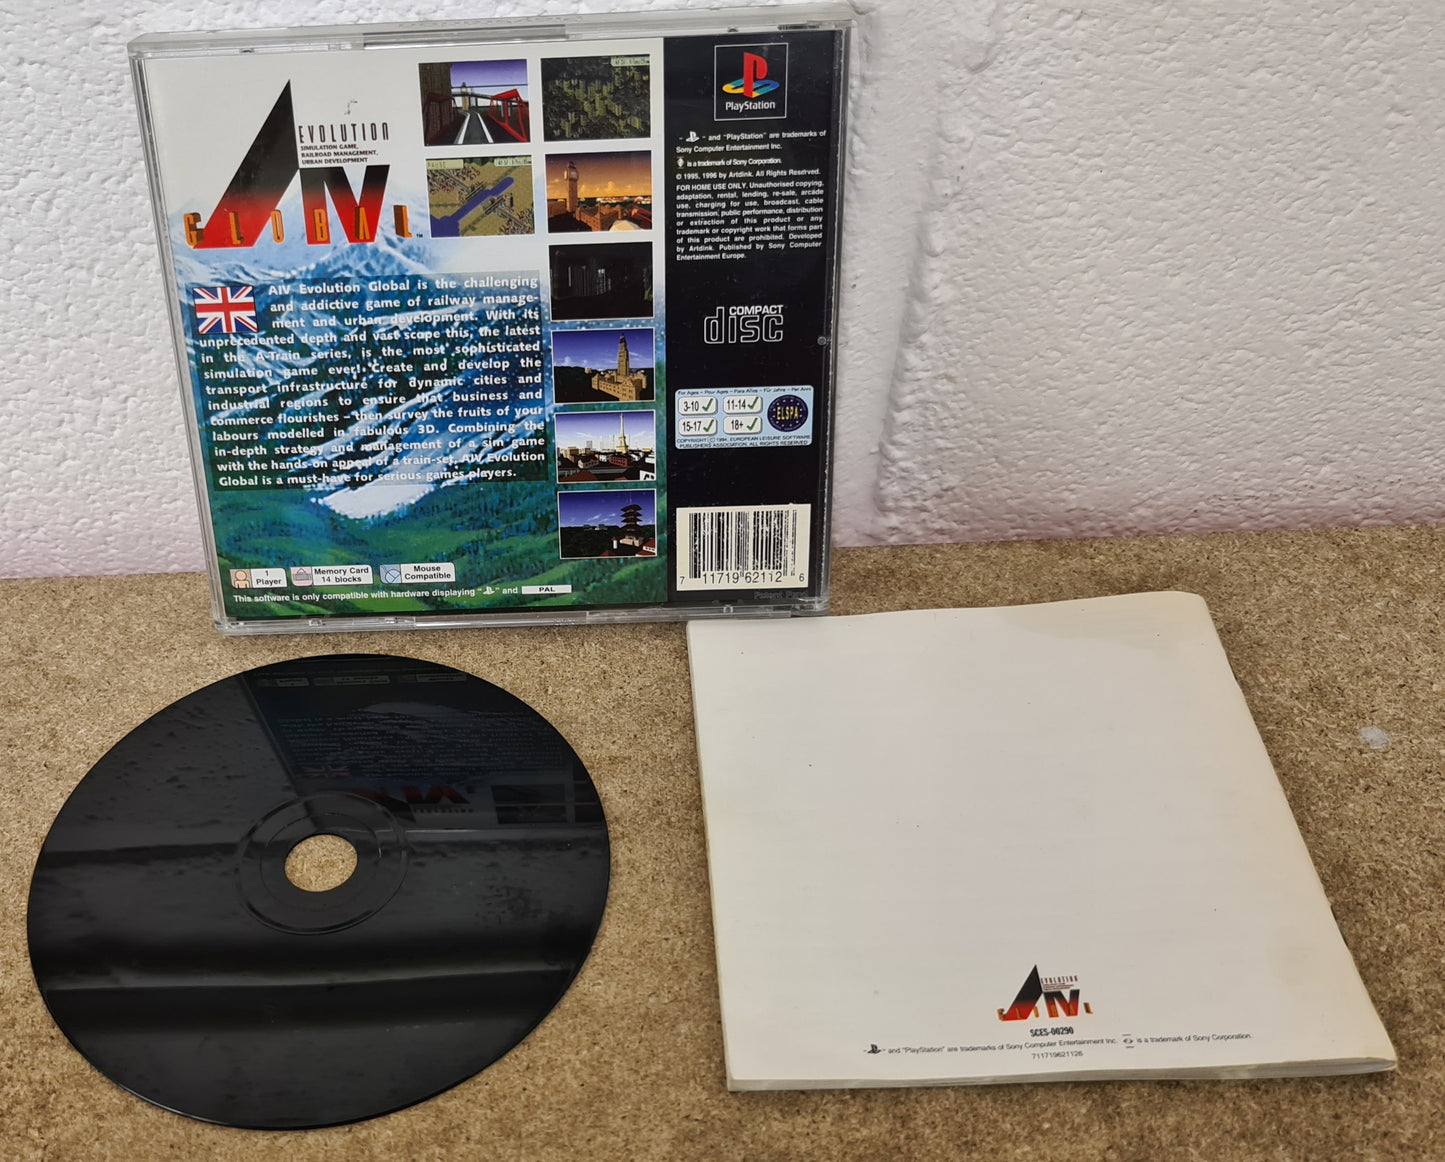 A.IV Evolution Global Sony Playstation 1 (PS1) RARE Game